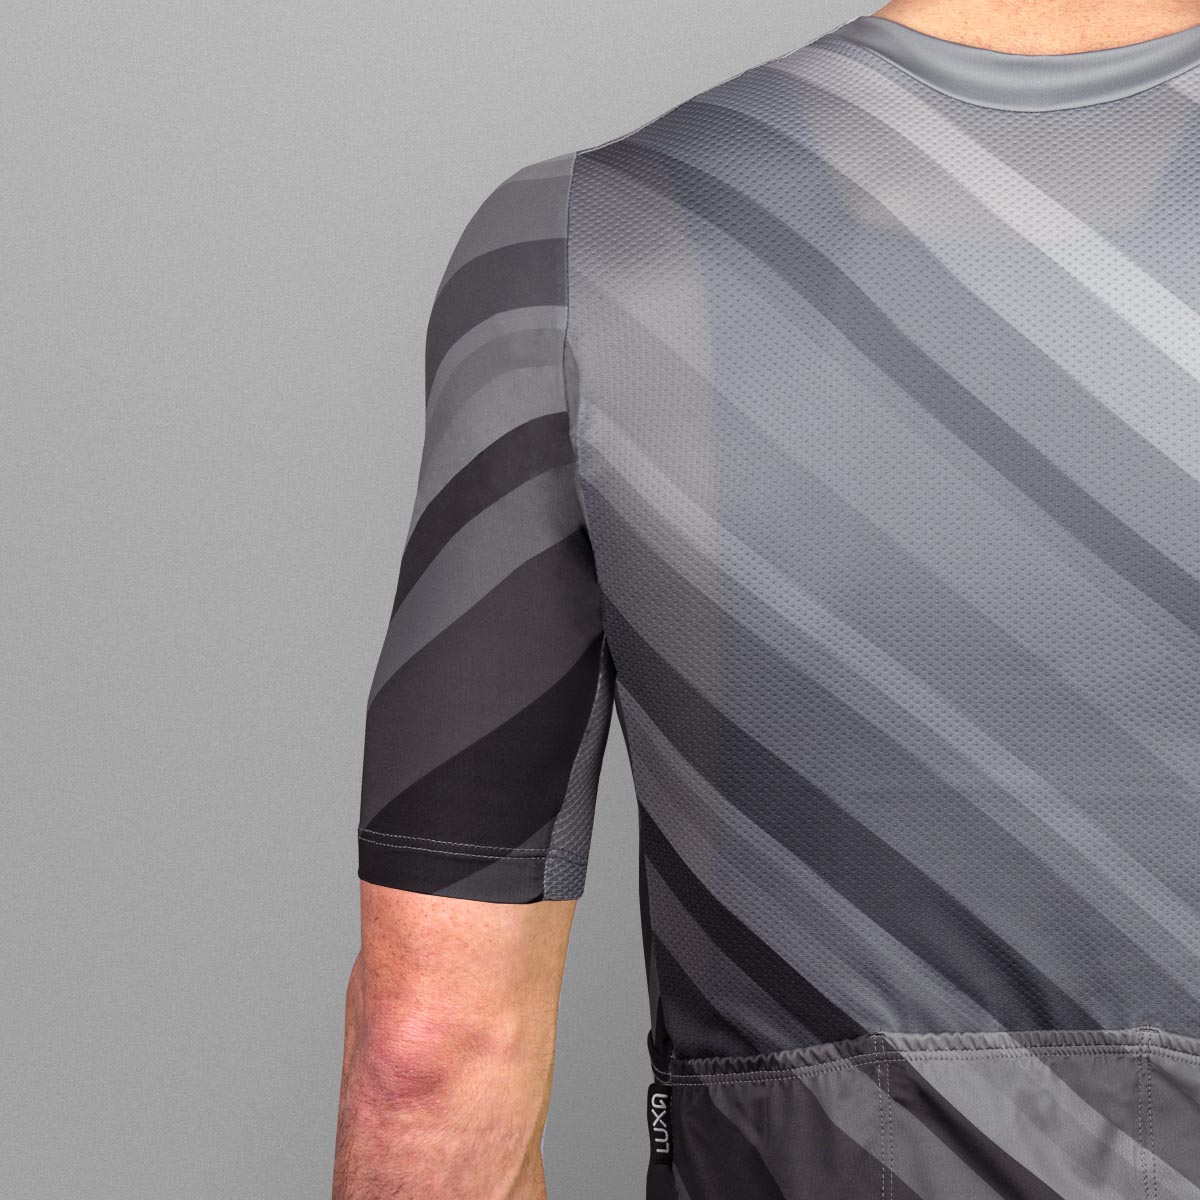 jerseys are form-fitting and made from lightweight, breathable materials, with subtle accents in black and gray.